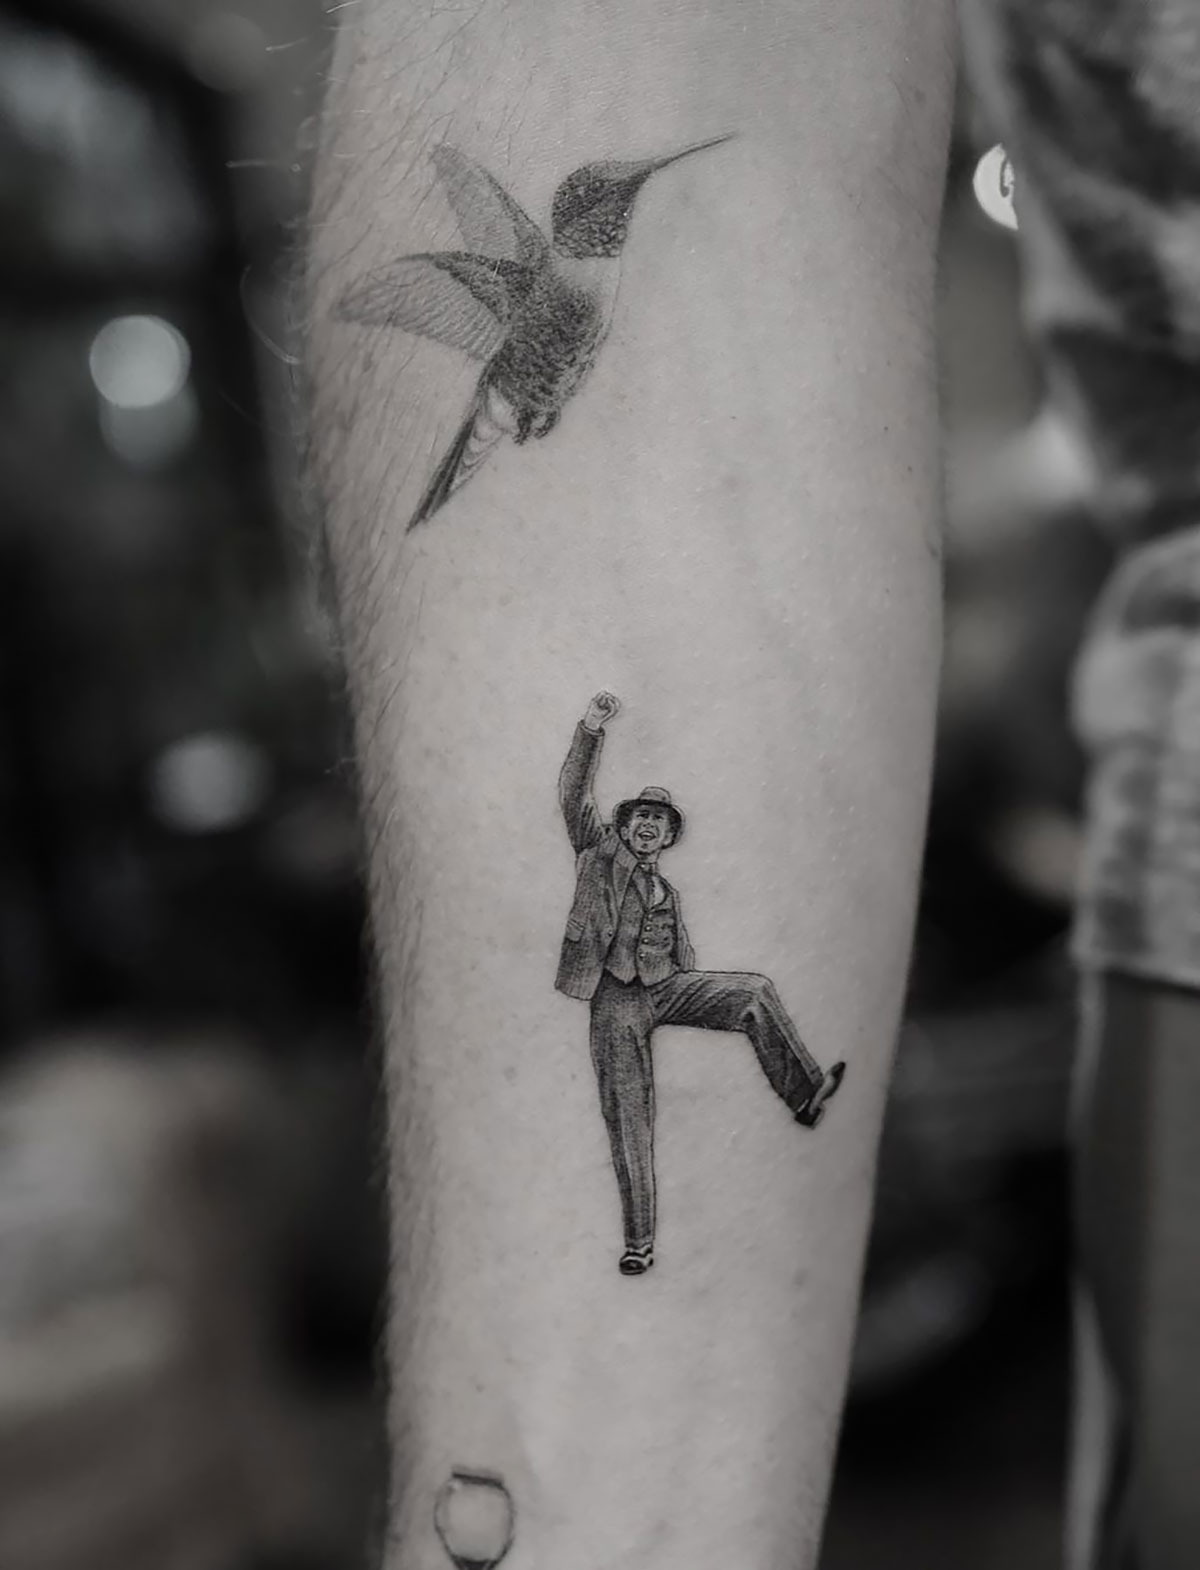 Zach Braff Gets Tattoo Of Nick Cordero To Honour His Late Friend And  Costar  HuffPost Entertainment